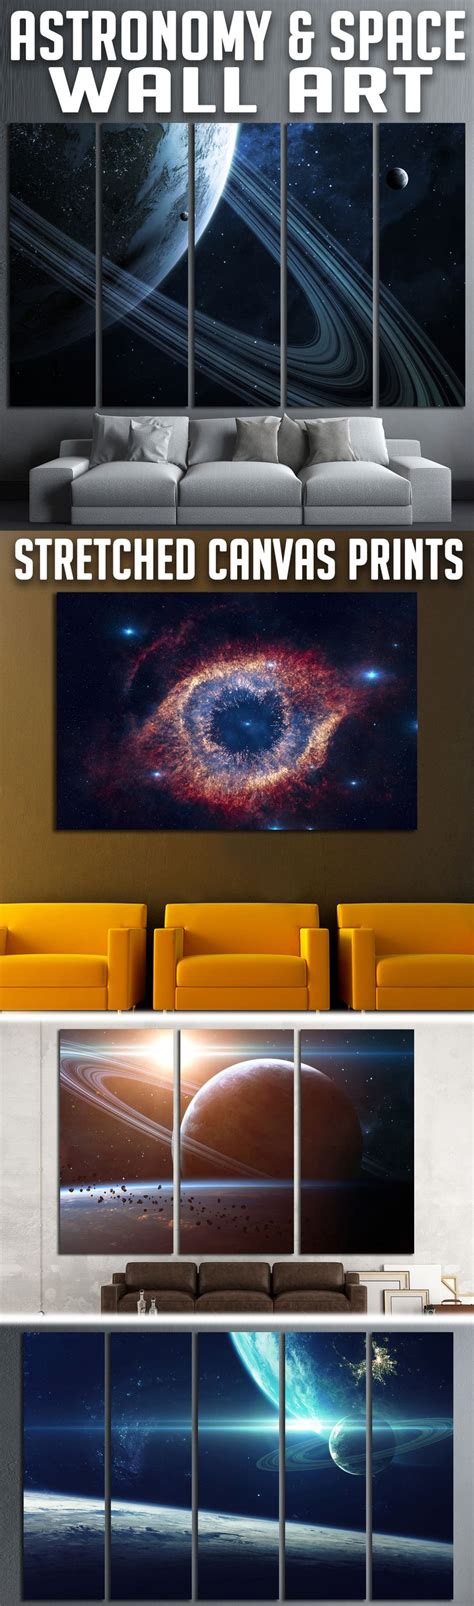 pin  astronomy space wall art